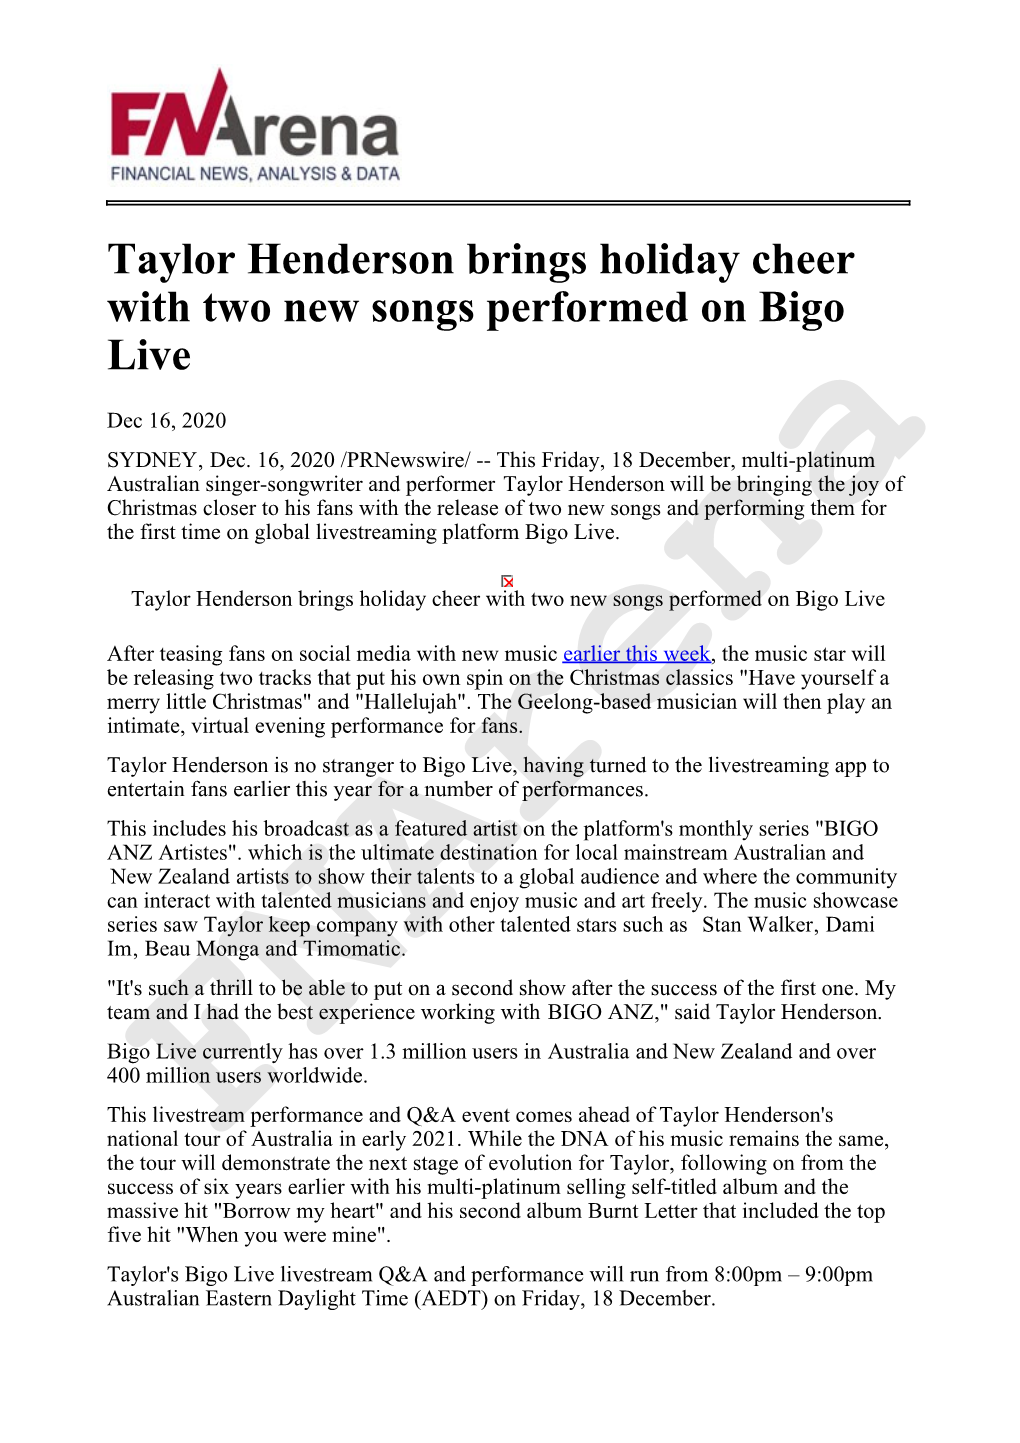 Taylor Henderson Brings Holiday Cheer with Two New Songs Performed on Bigo Live